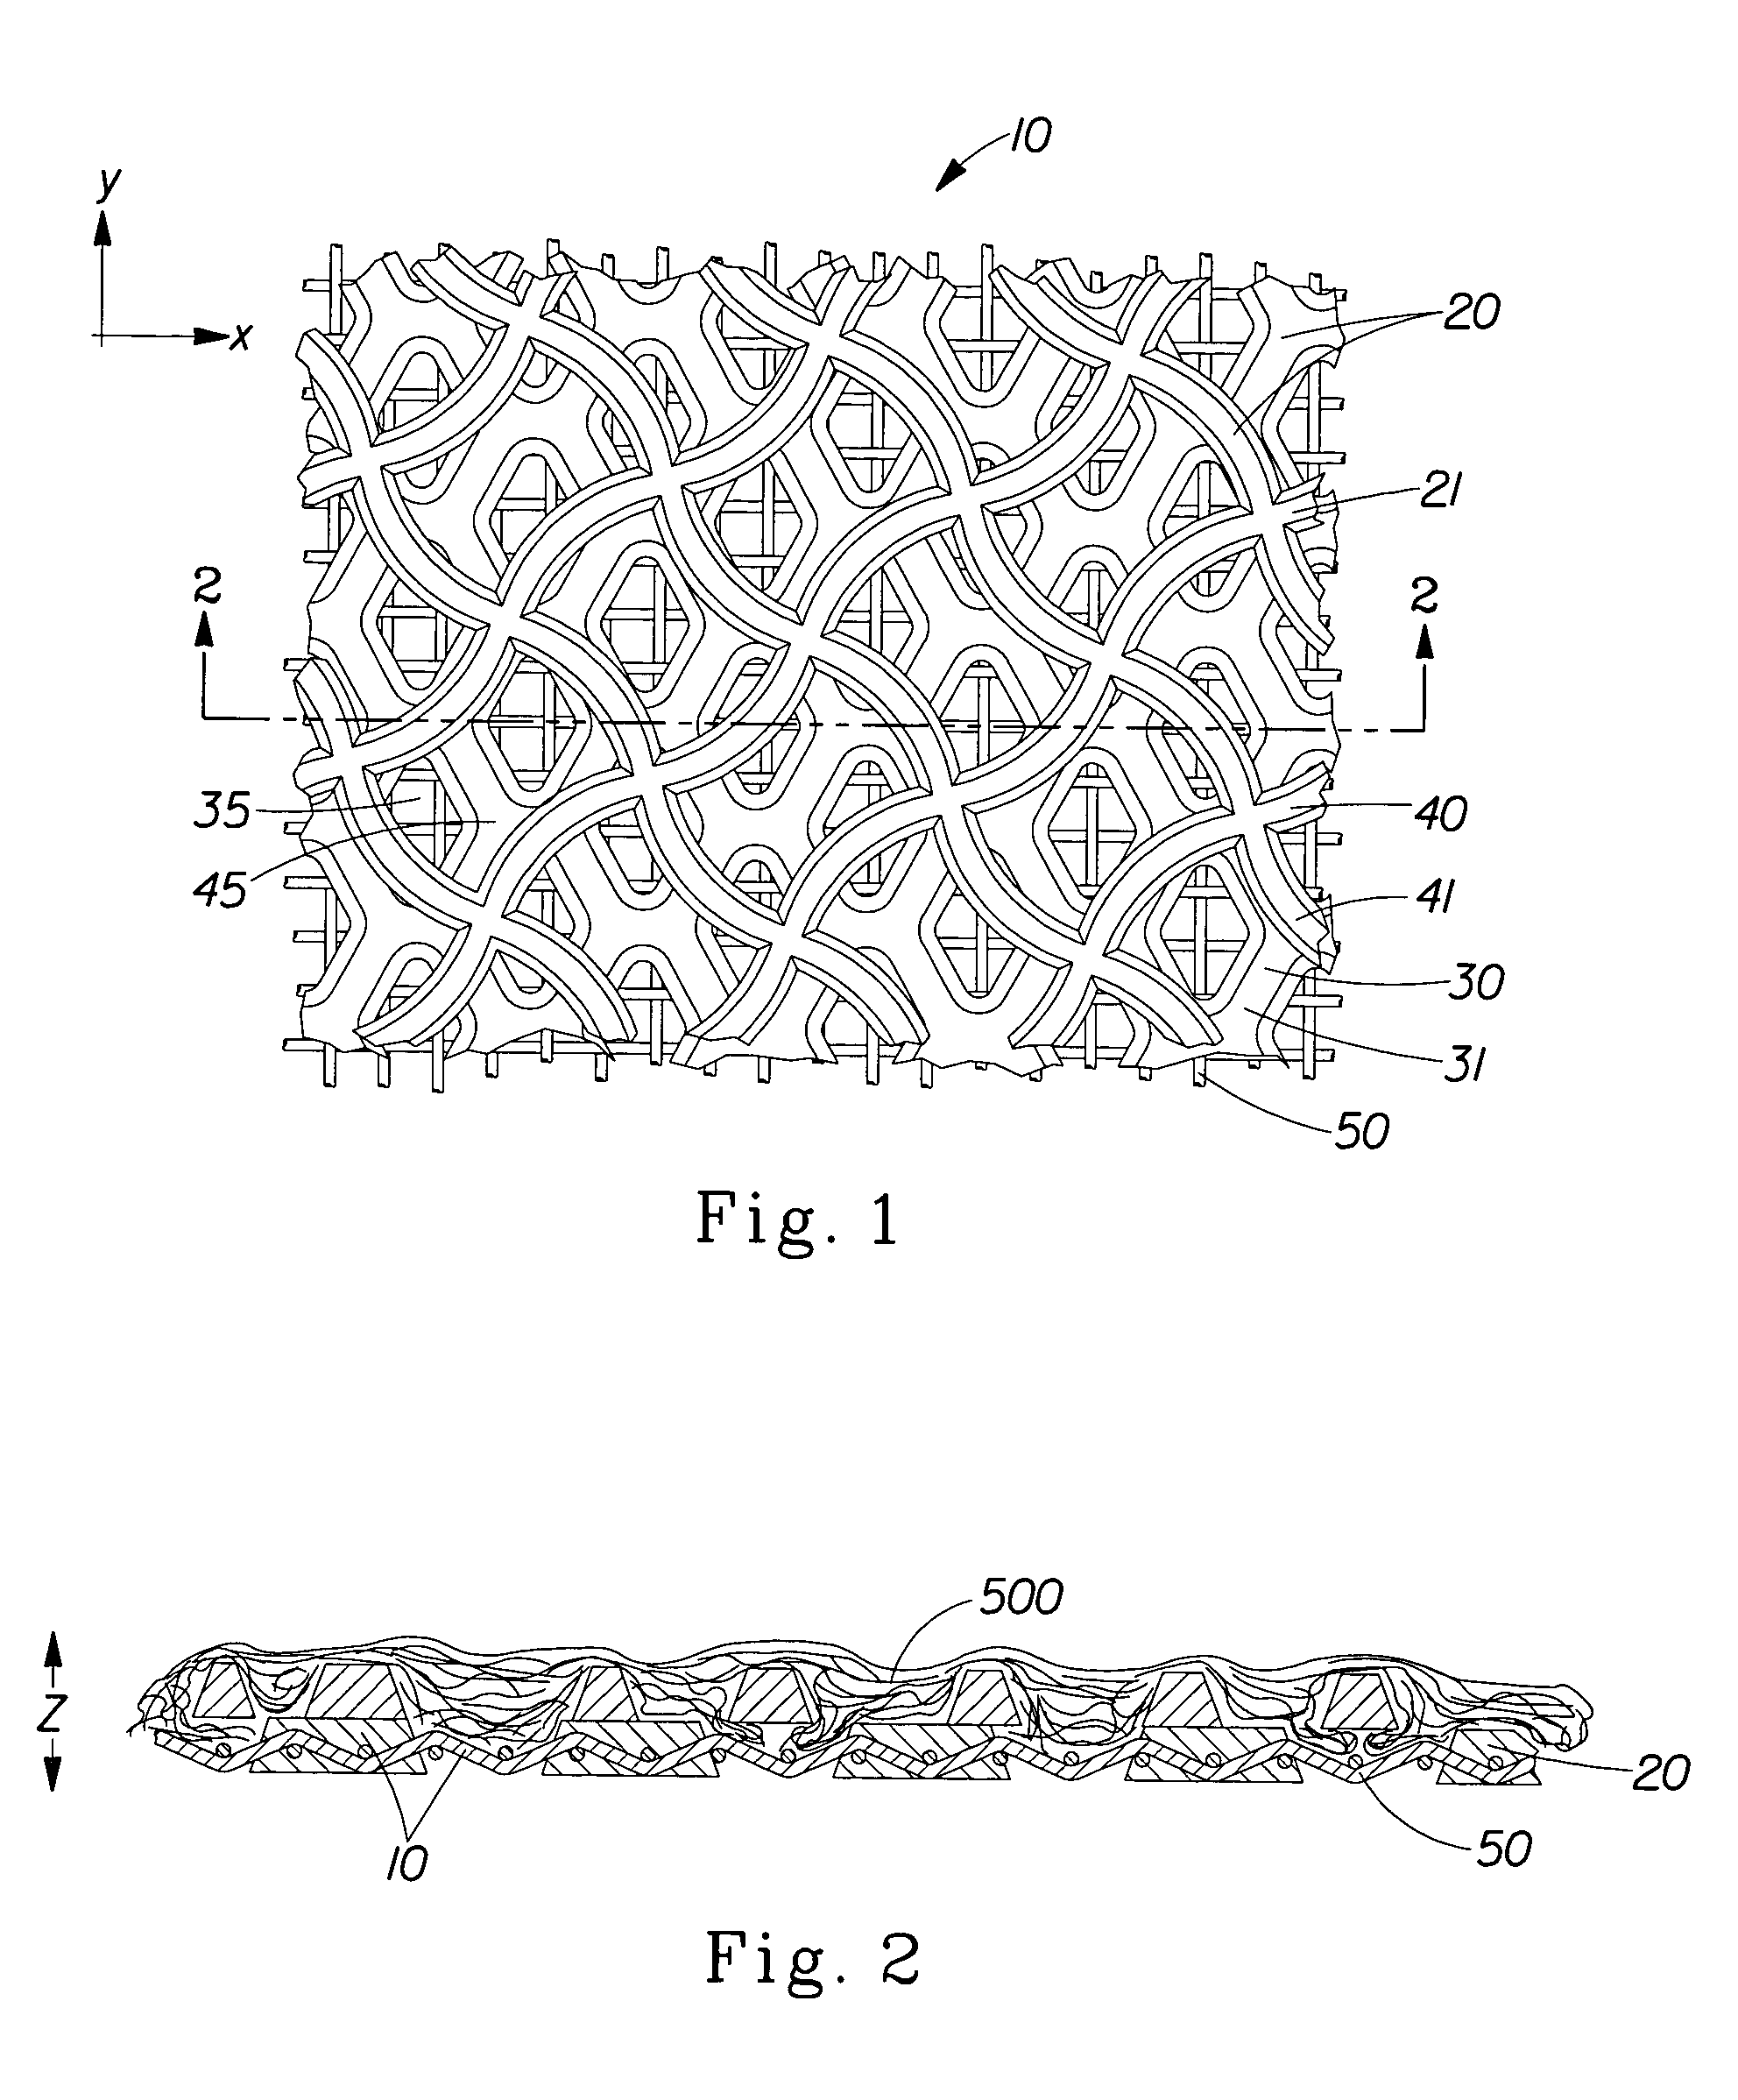 Process for producing a fibrous structure having increased surface area